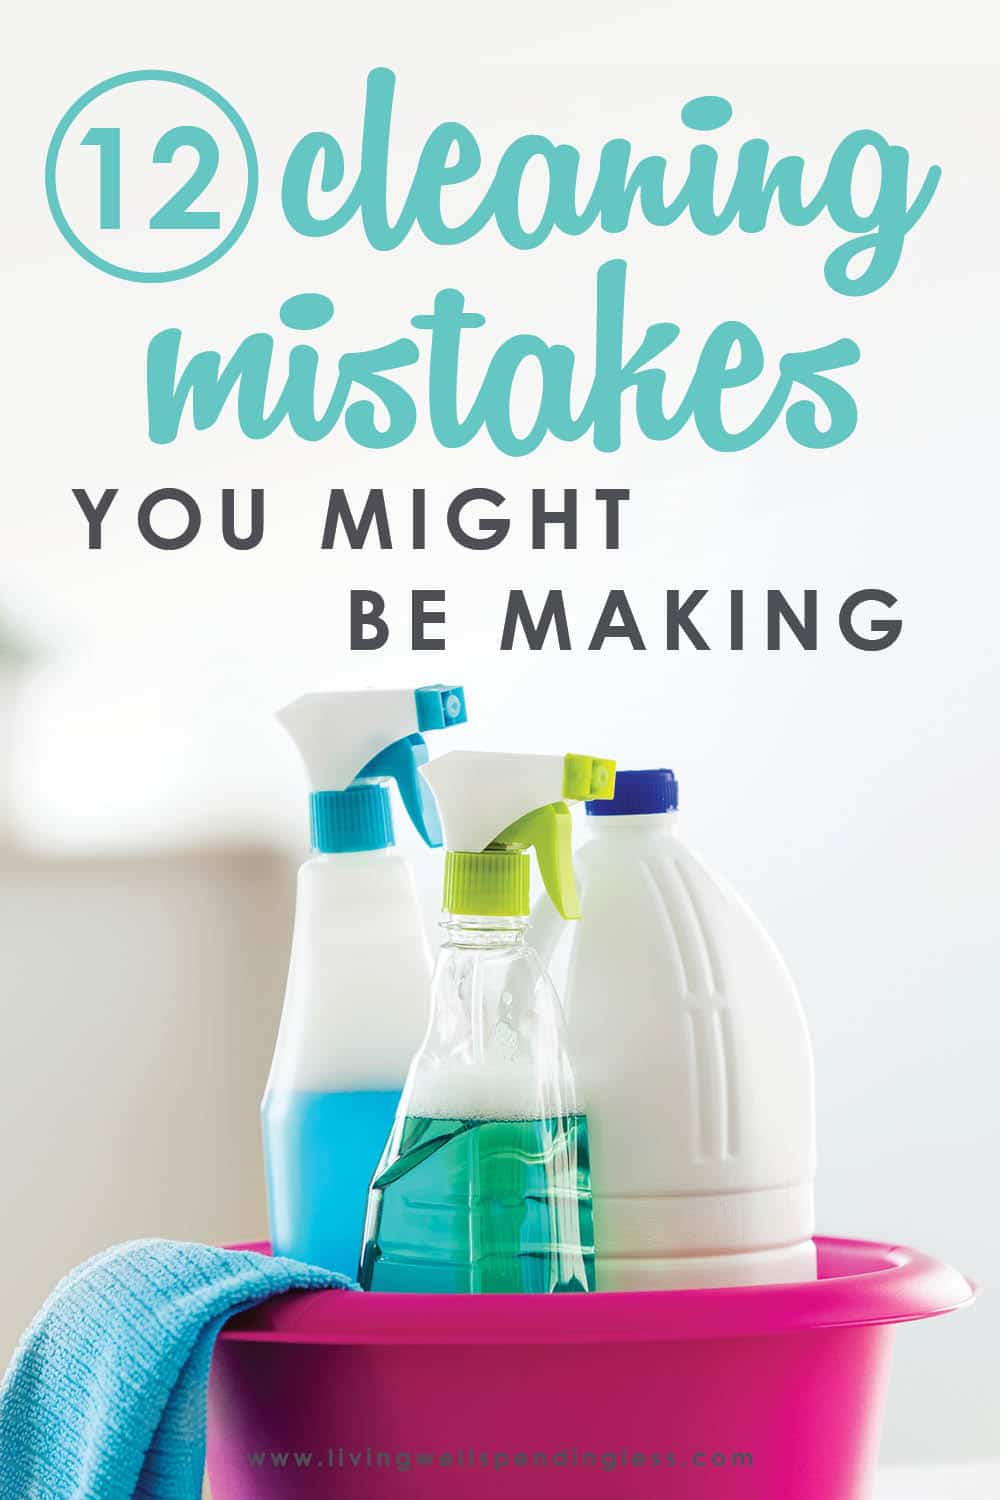 8 Mistakes You May Be Making When Cleaning Your Floors